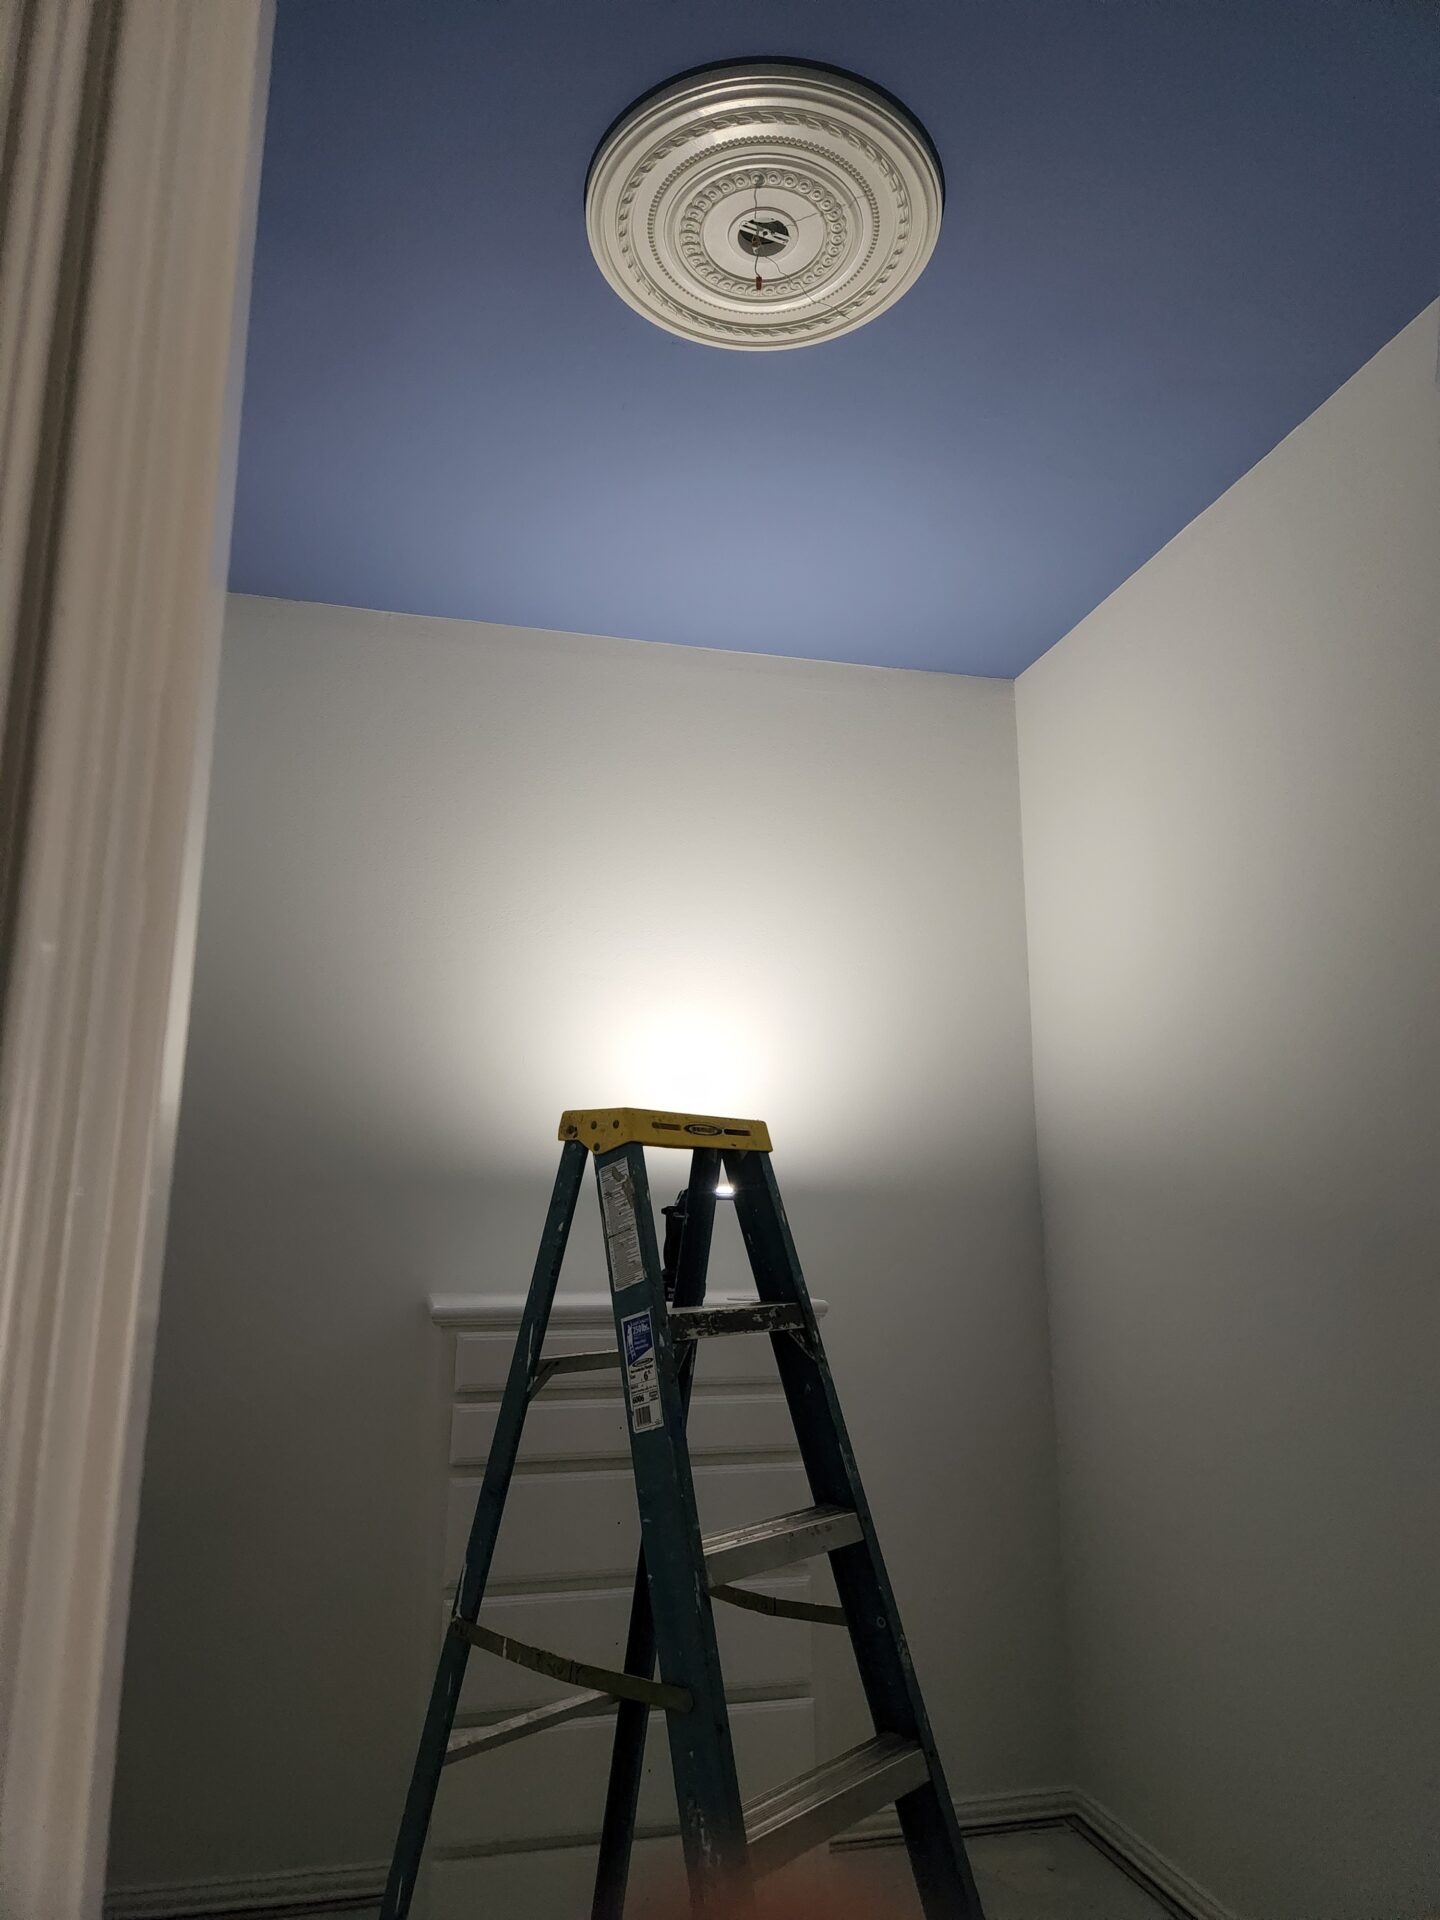 Hollywood Regency Closet Makeover - Benjamin Moore Paint and New Ceiling Medallion